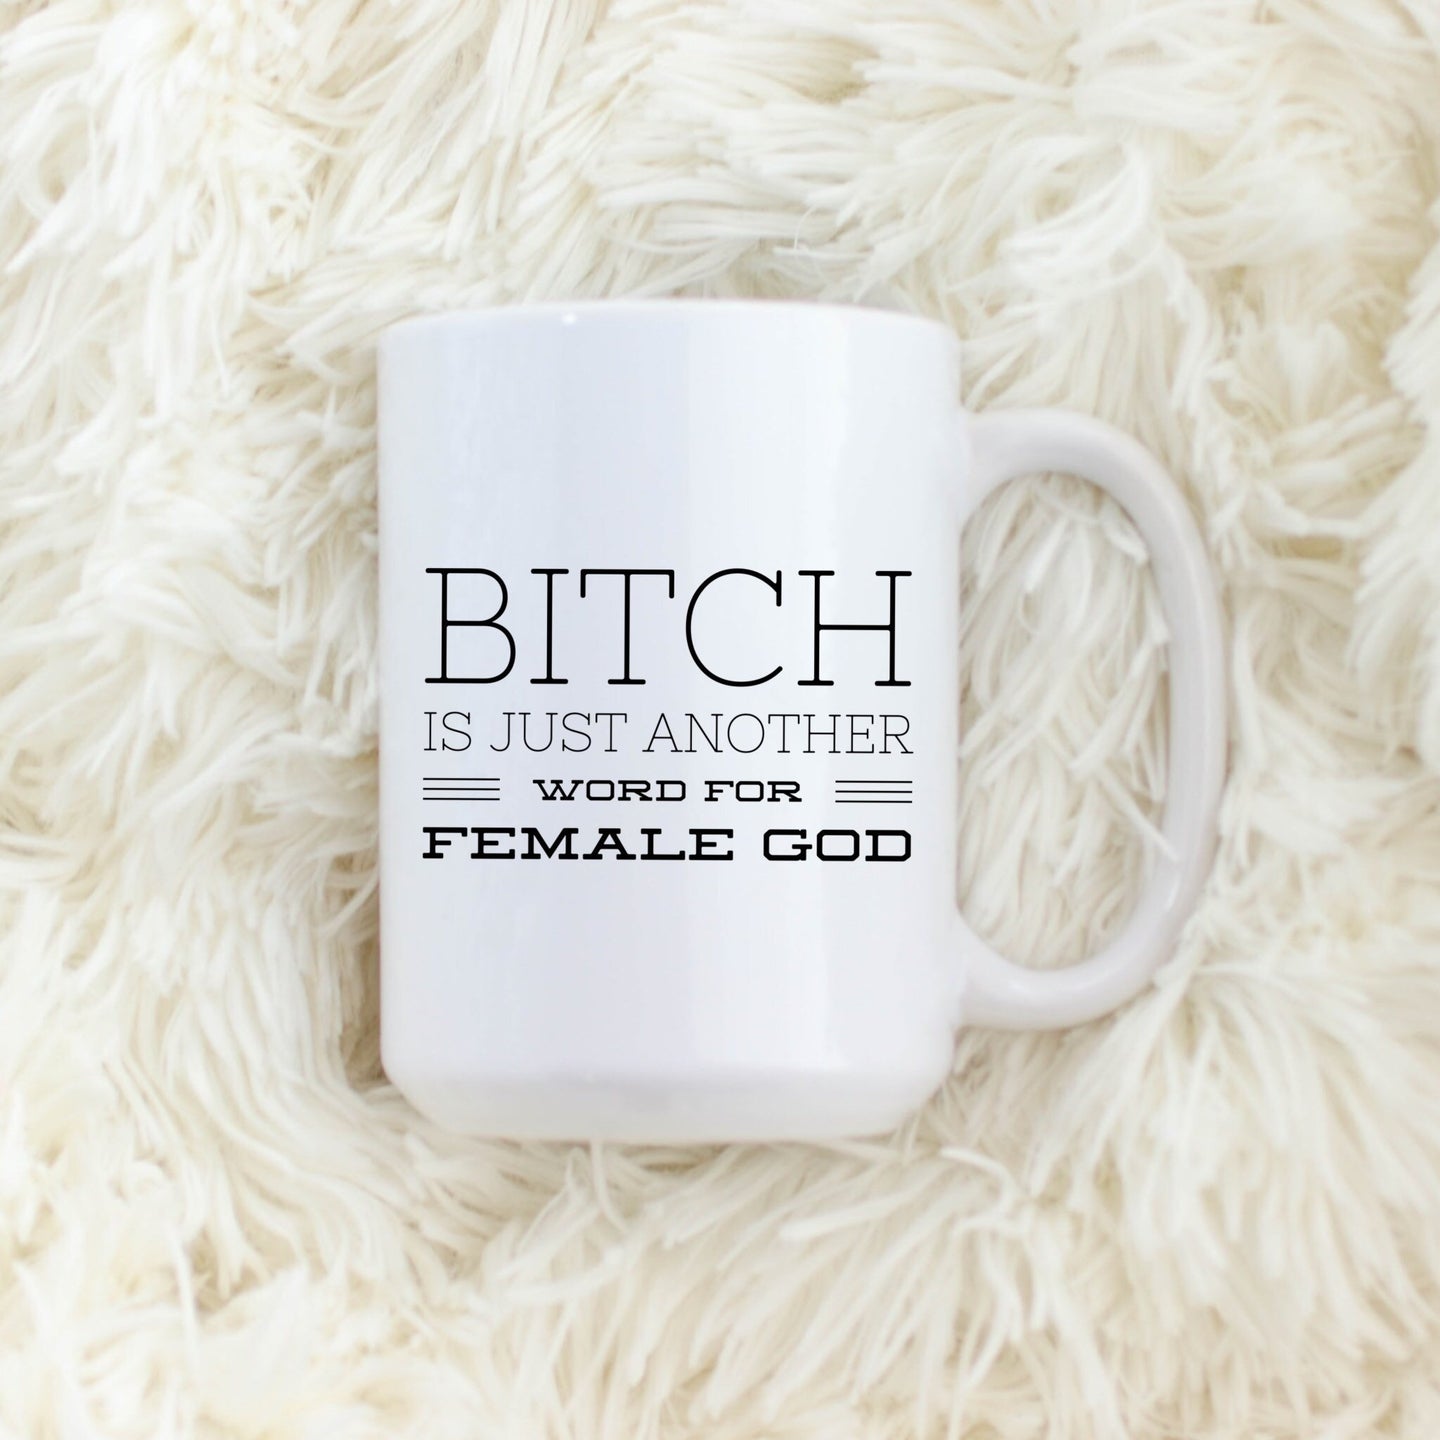 Bitch is just another word for Female God